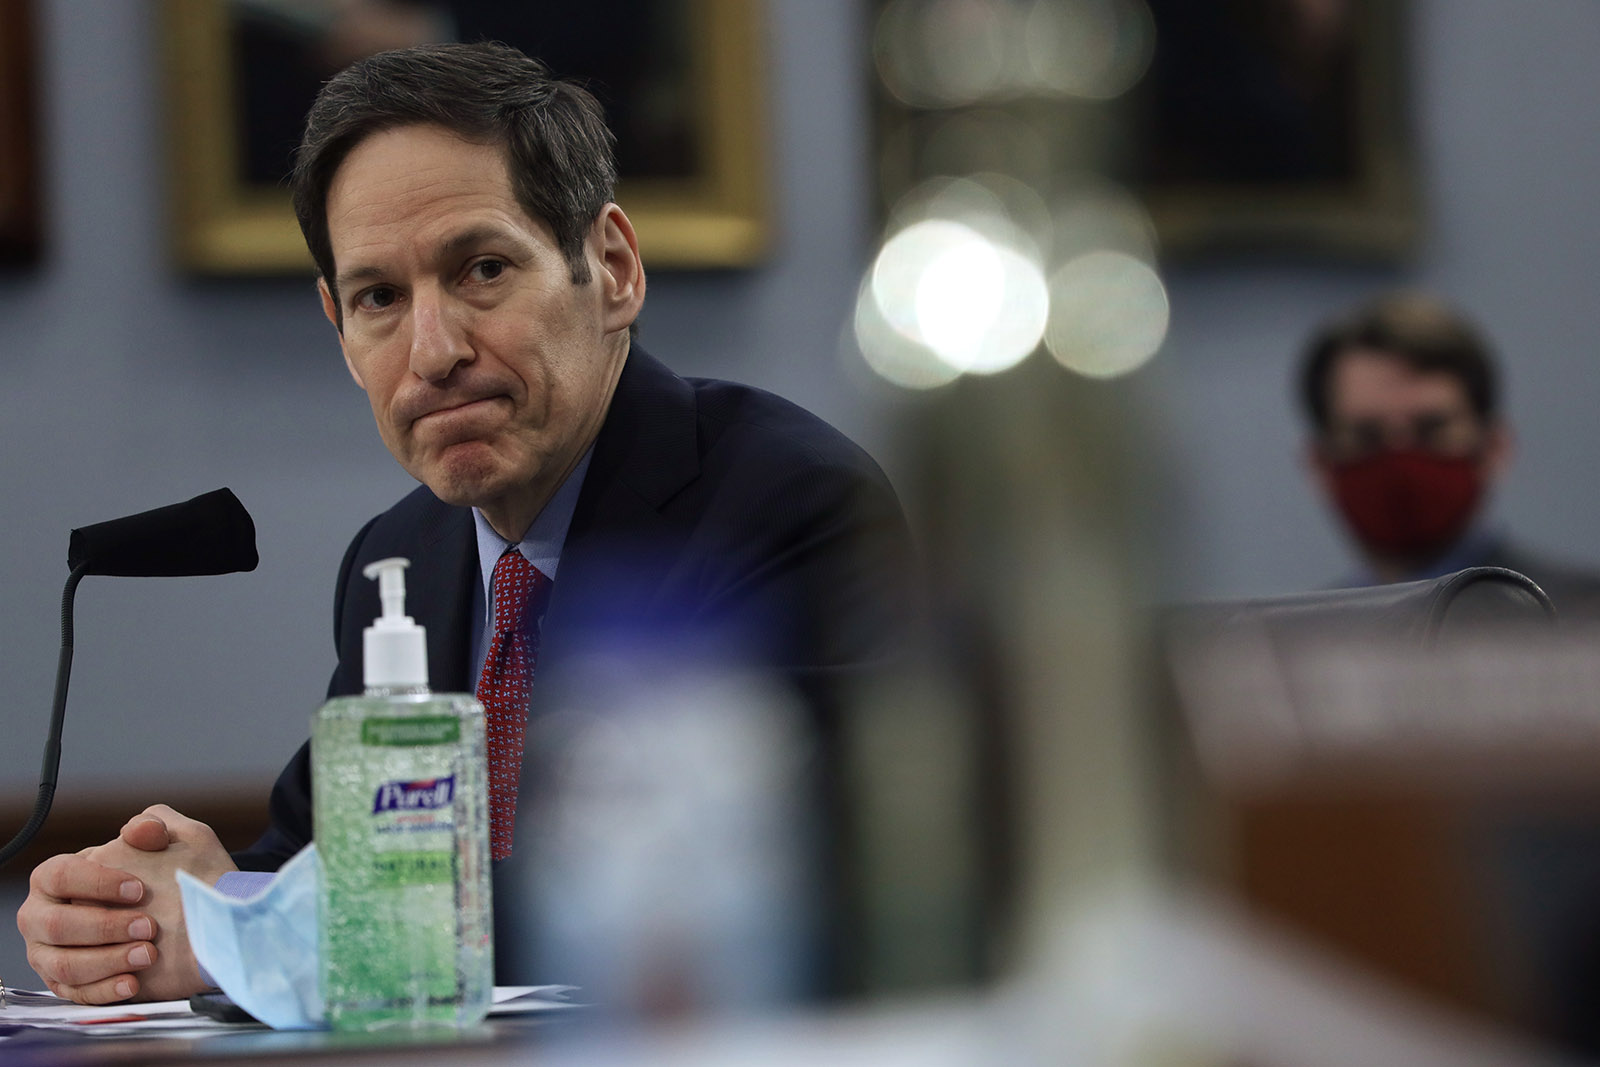 Former director of the Centers for Disease Control and Prevention Dr. Tom Frieden speaks during a hearing on May 6 in Washington.